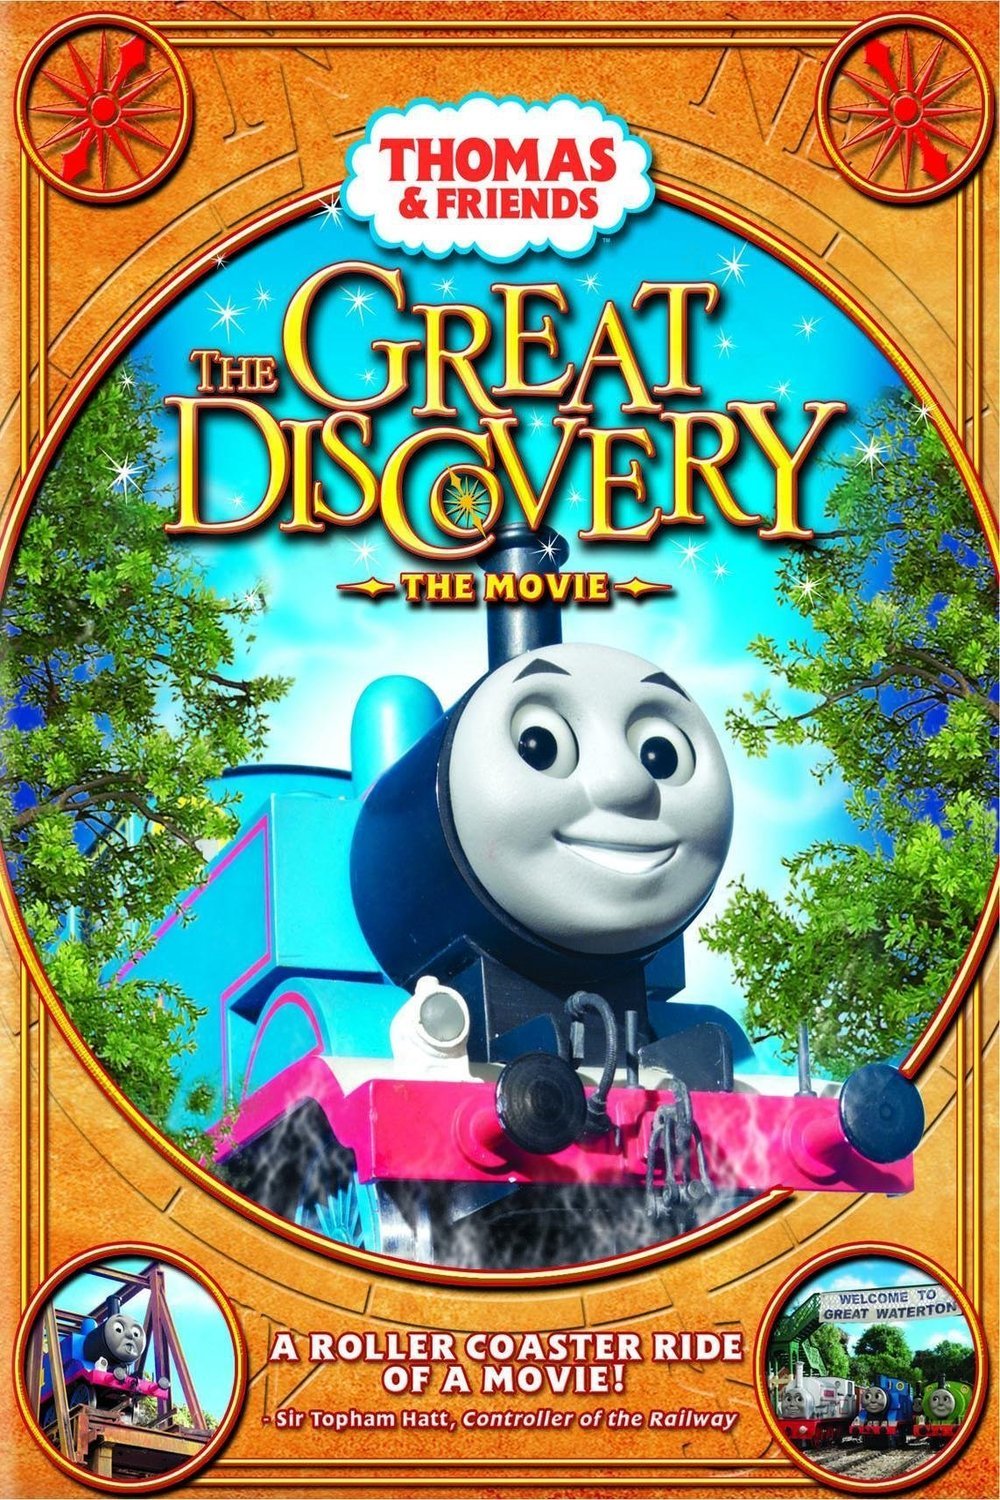 L'affiche du film Thomas & Friends: The Great Discovery - The Movie